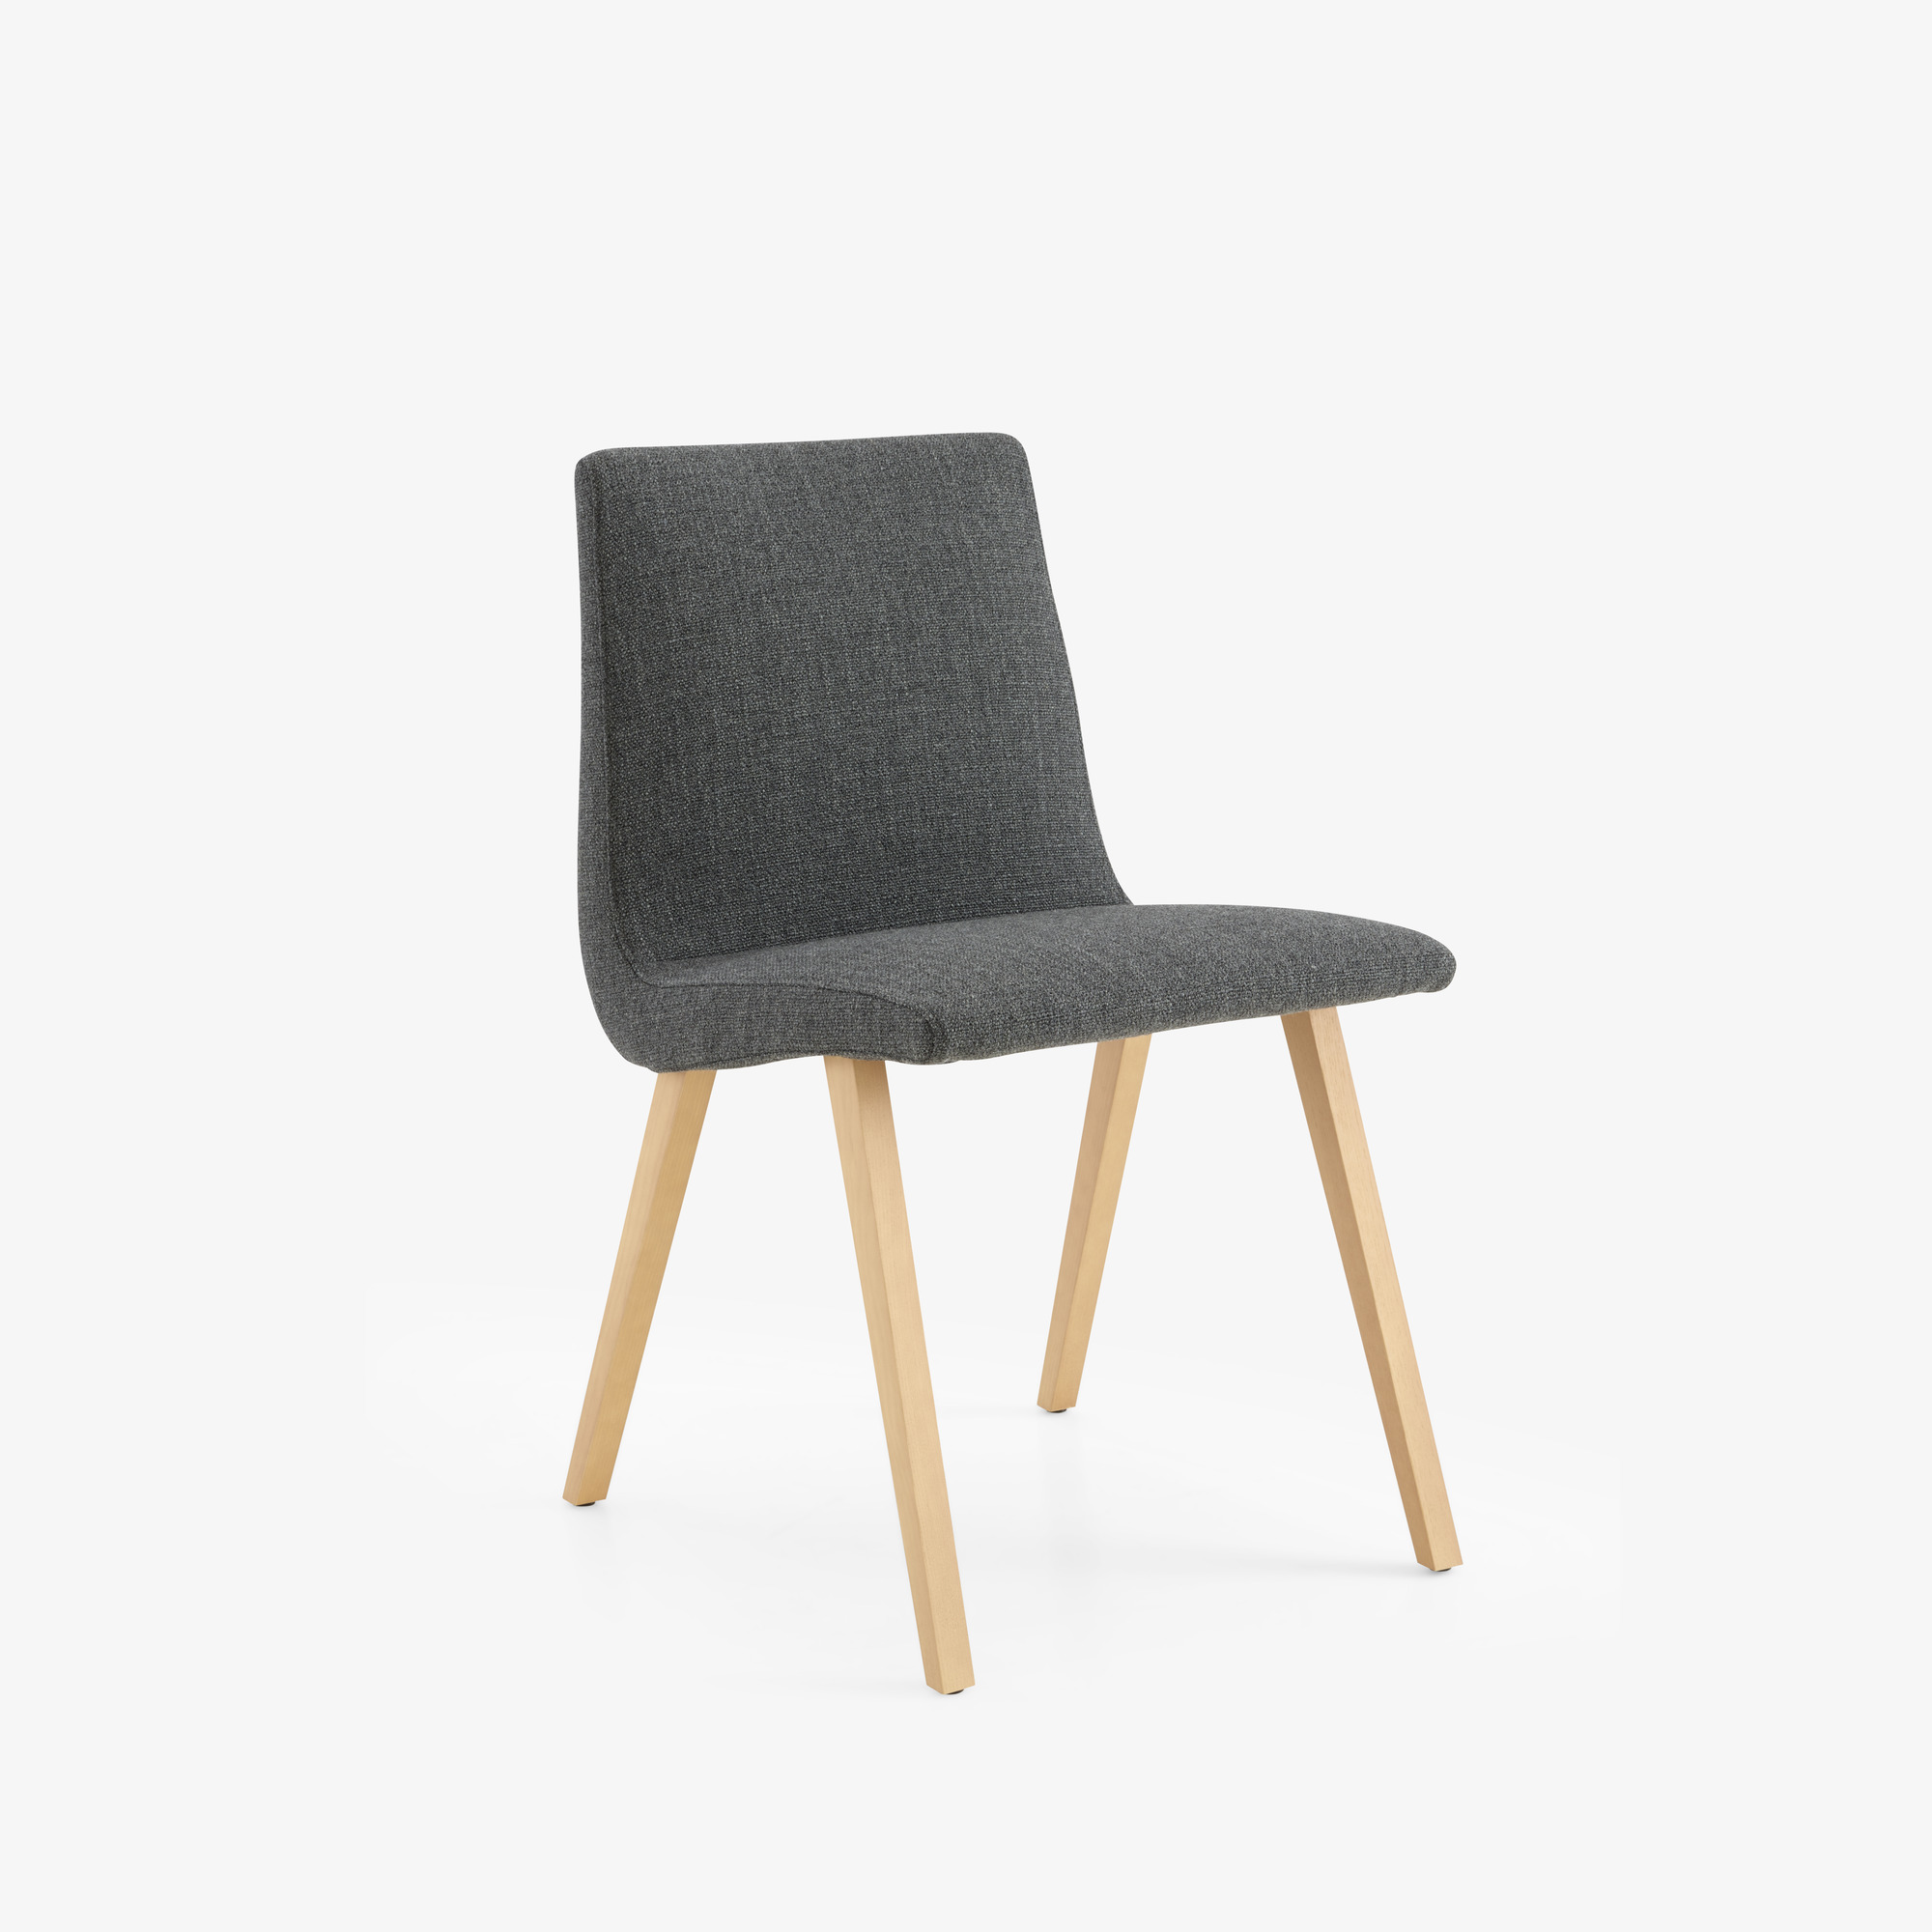 Image Dining chair wooden base 8